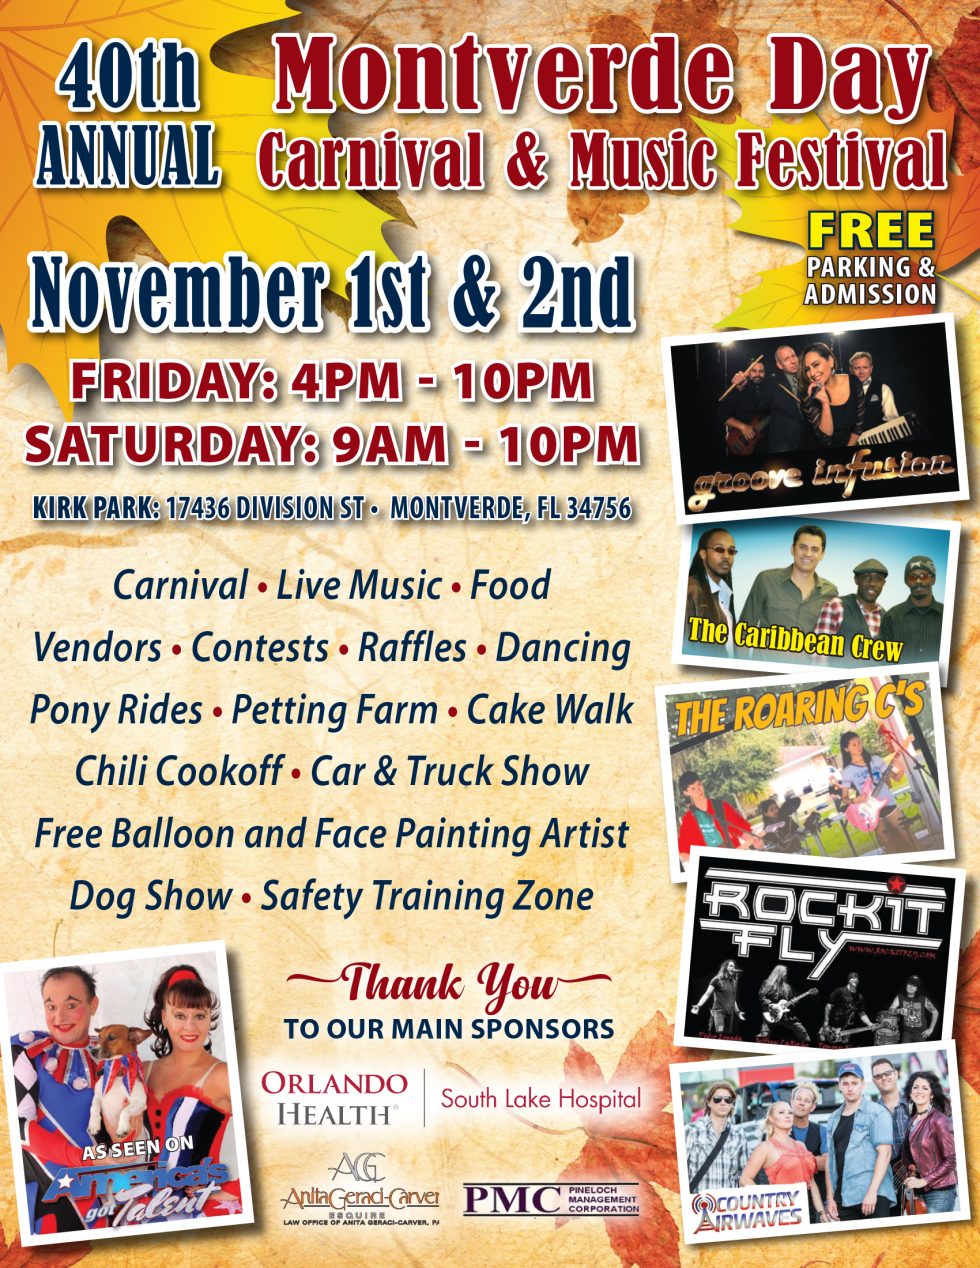 40th Annual Montverde Day Carnival & Music Festival Town of Montverde